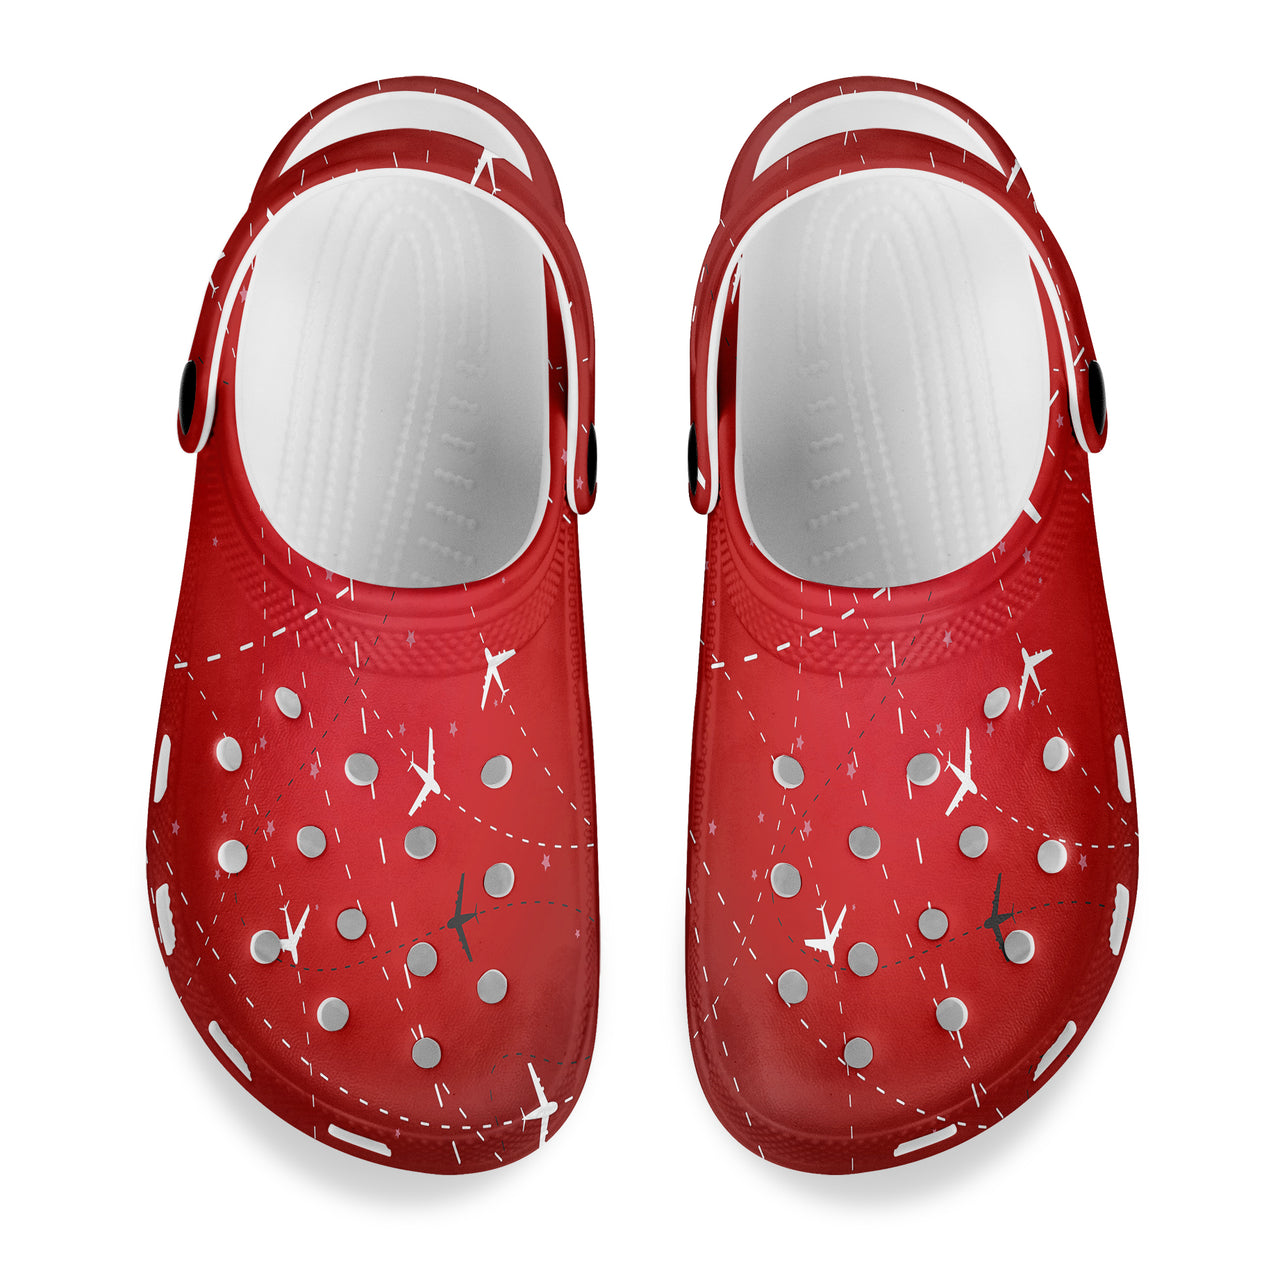 Travelling with Aircraft (Red) Designed Hole Shoes & Slippers (WOMEN)